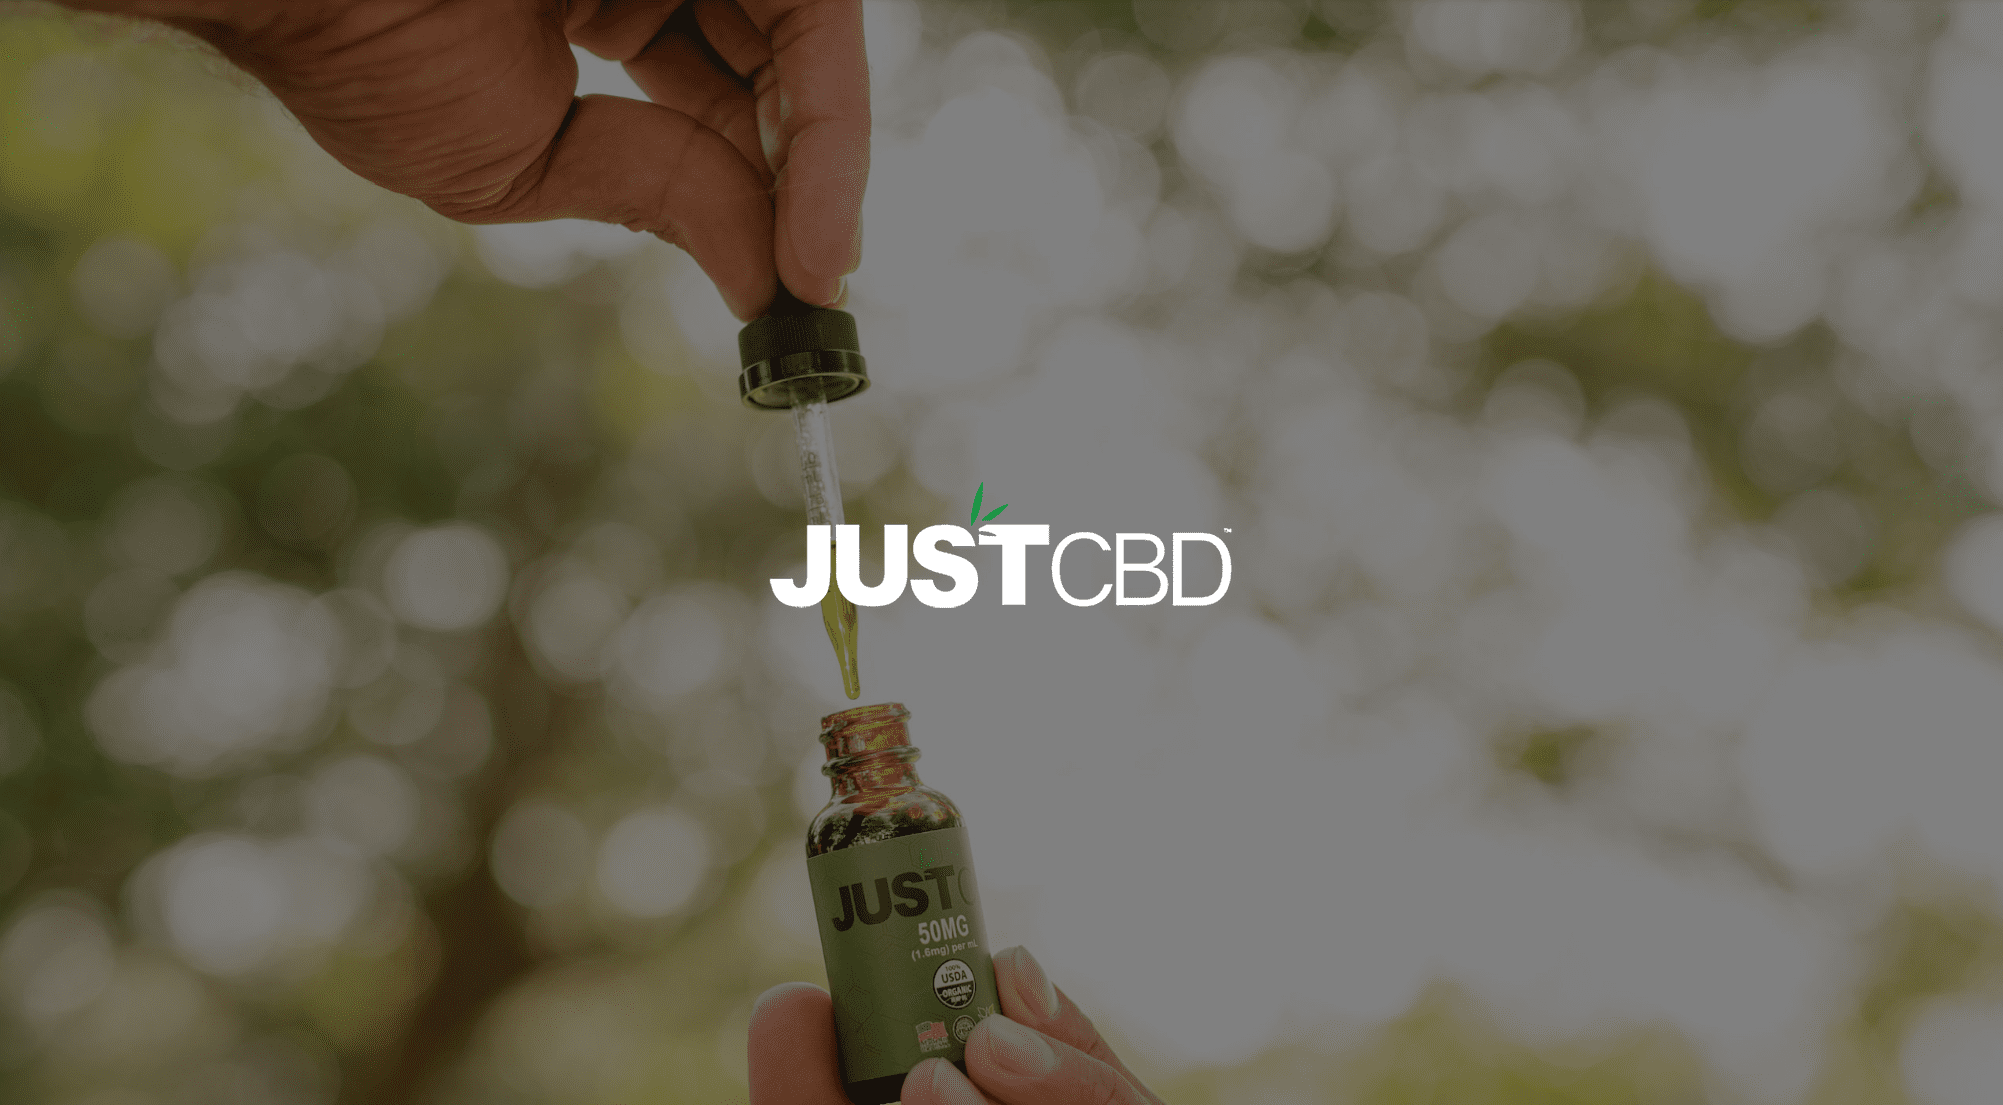 White JustCBD logo with green leaves with background of bottle of JUSTCBD Hemp Seed Oil being held with a filled dropper poised above it